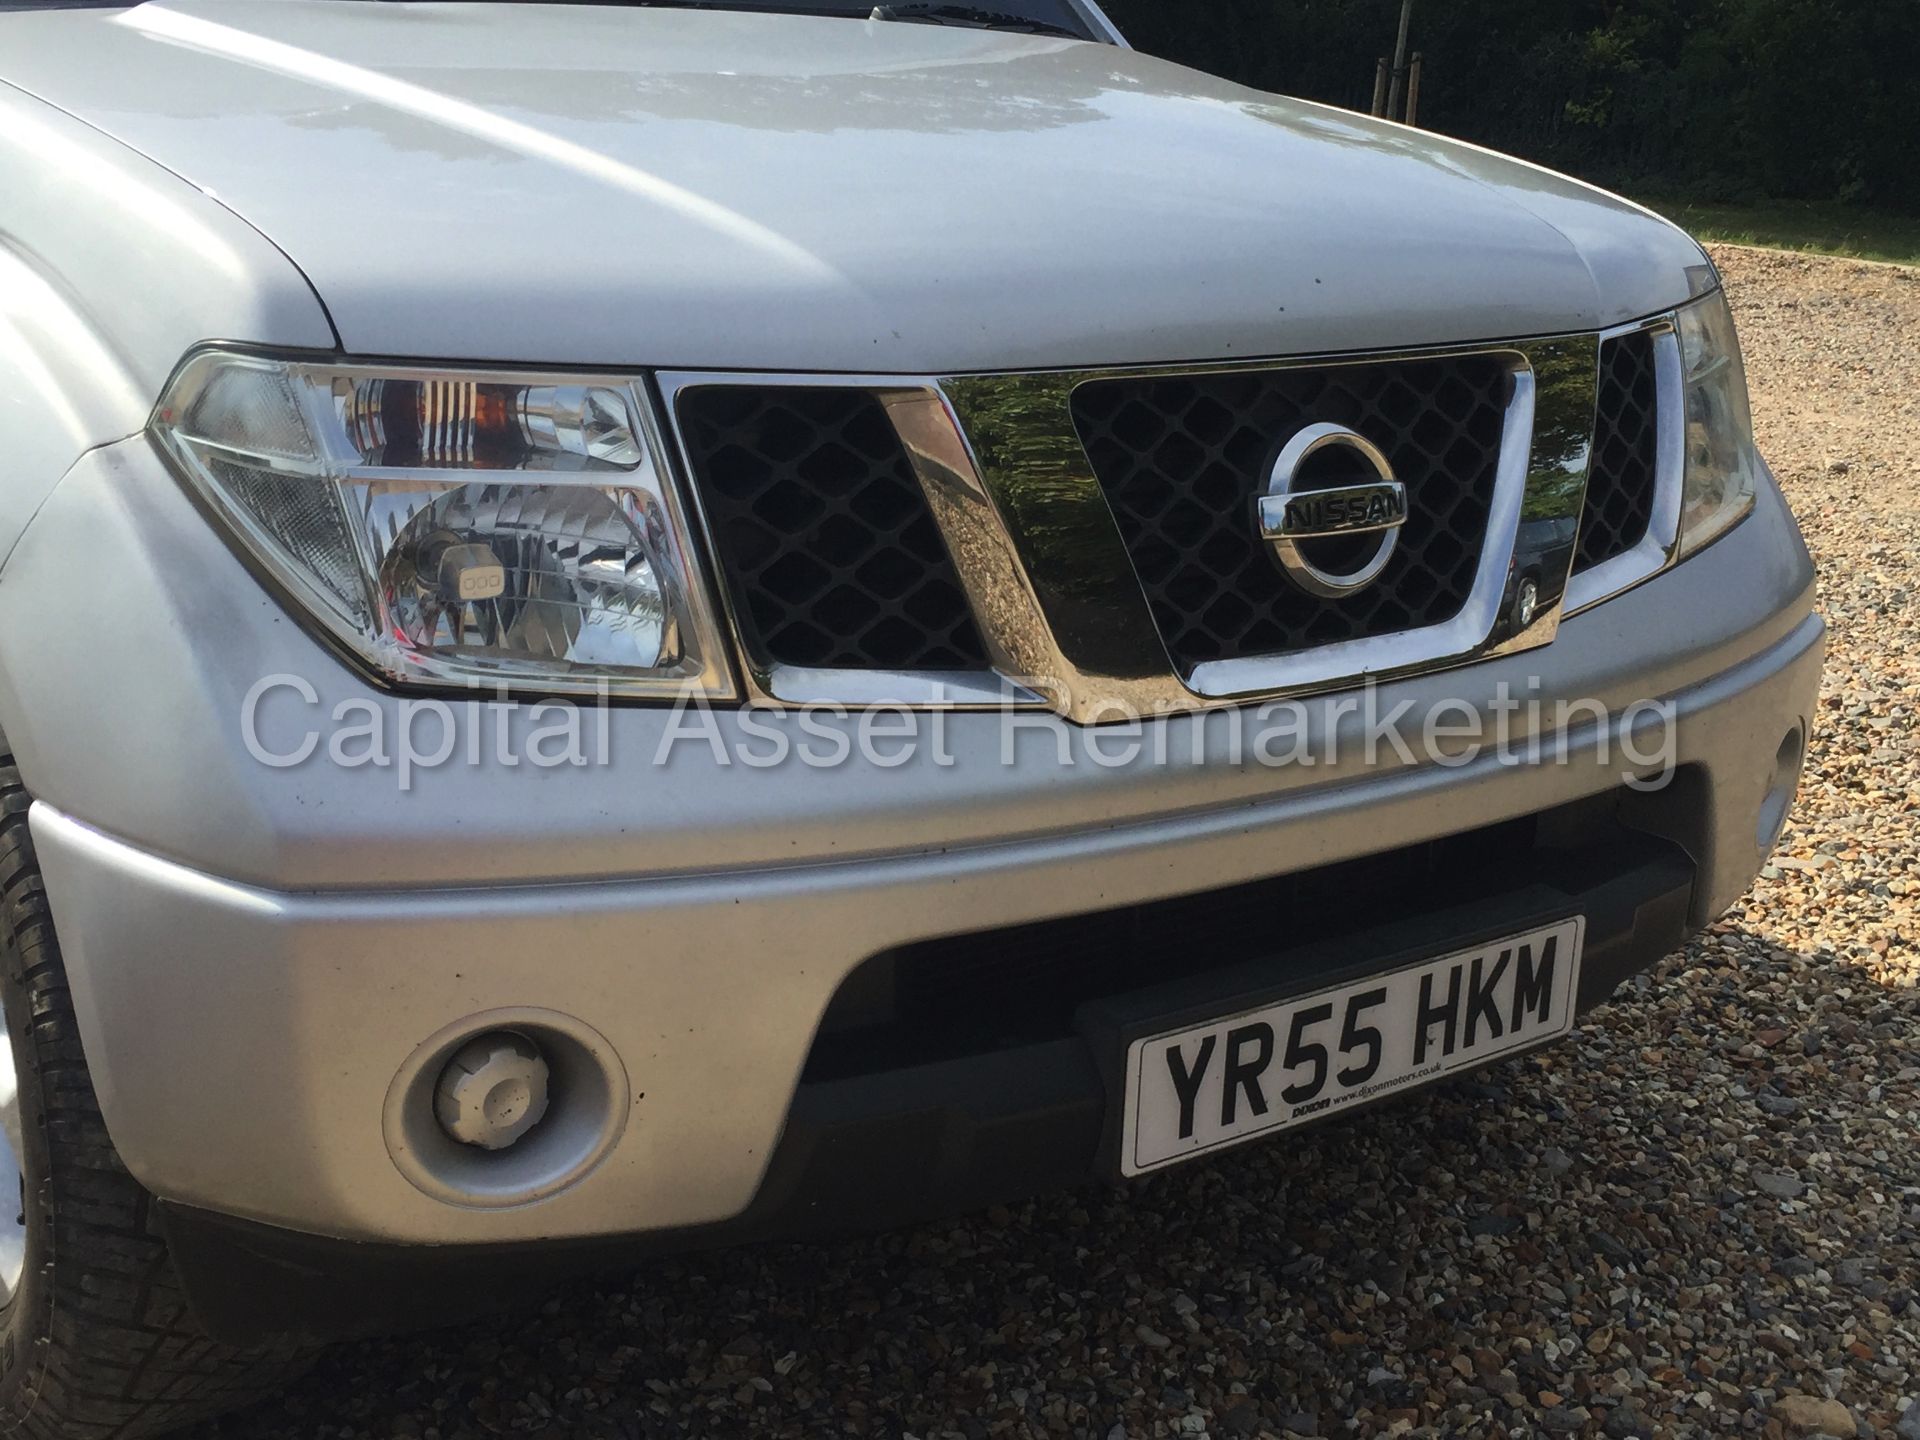 NISSAN NAVARA 'DOUBLE CAB PICK-UP' (2006 MODEL) '2.5 DCI - 6 SPEED - AIR CON' (NO VAT - SAVE 20%) - Image 9 of 23